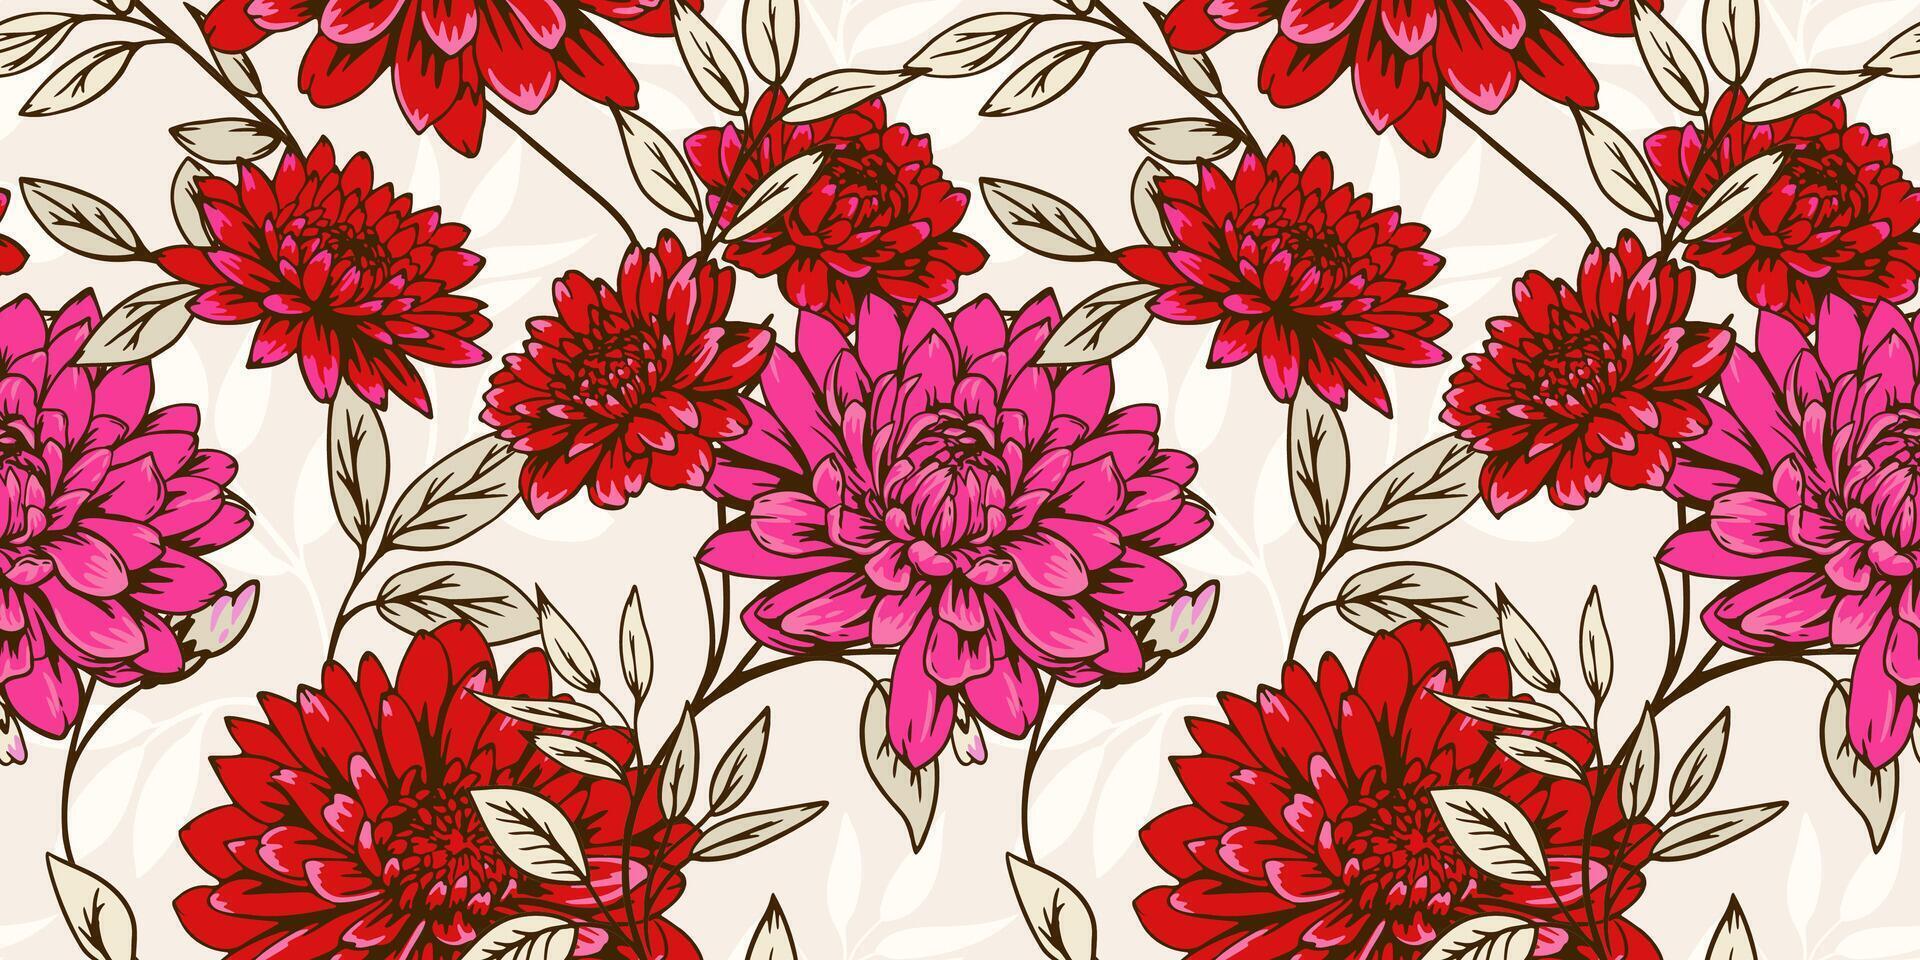 Blooming red flowers and leaves branches seamless pattern on a light background. Abstract artistic floral stems printing. Vector hand drawn illustration. Template for design, fabric, fashion, textile